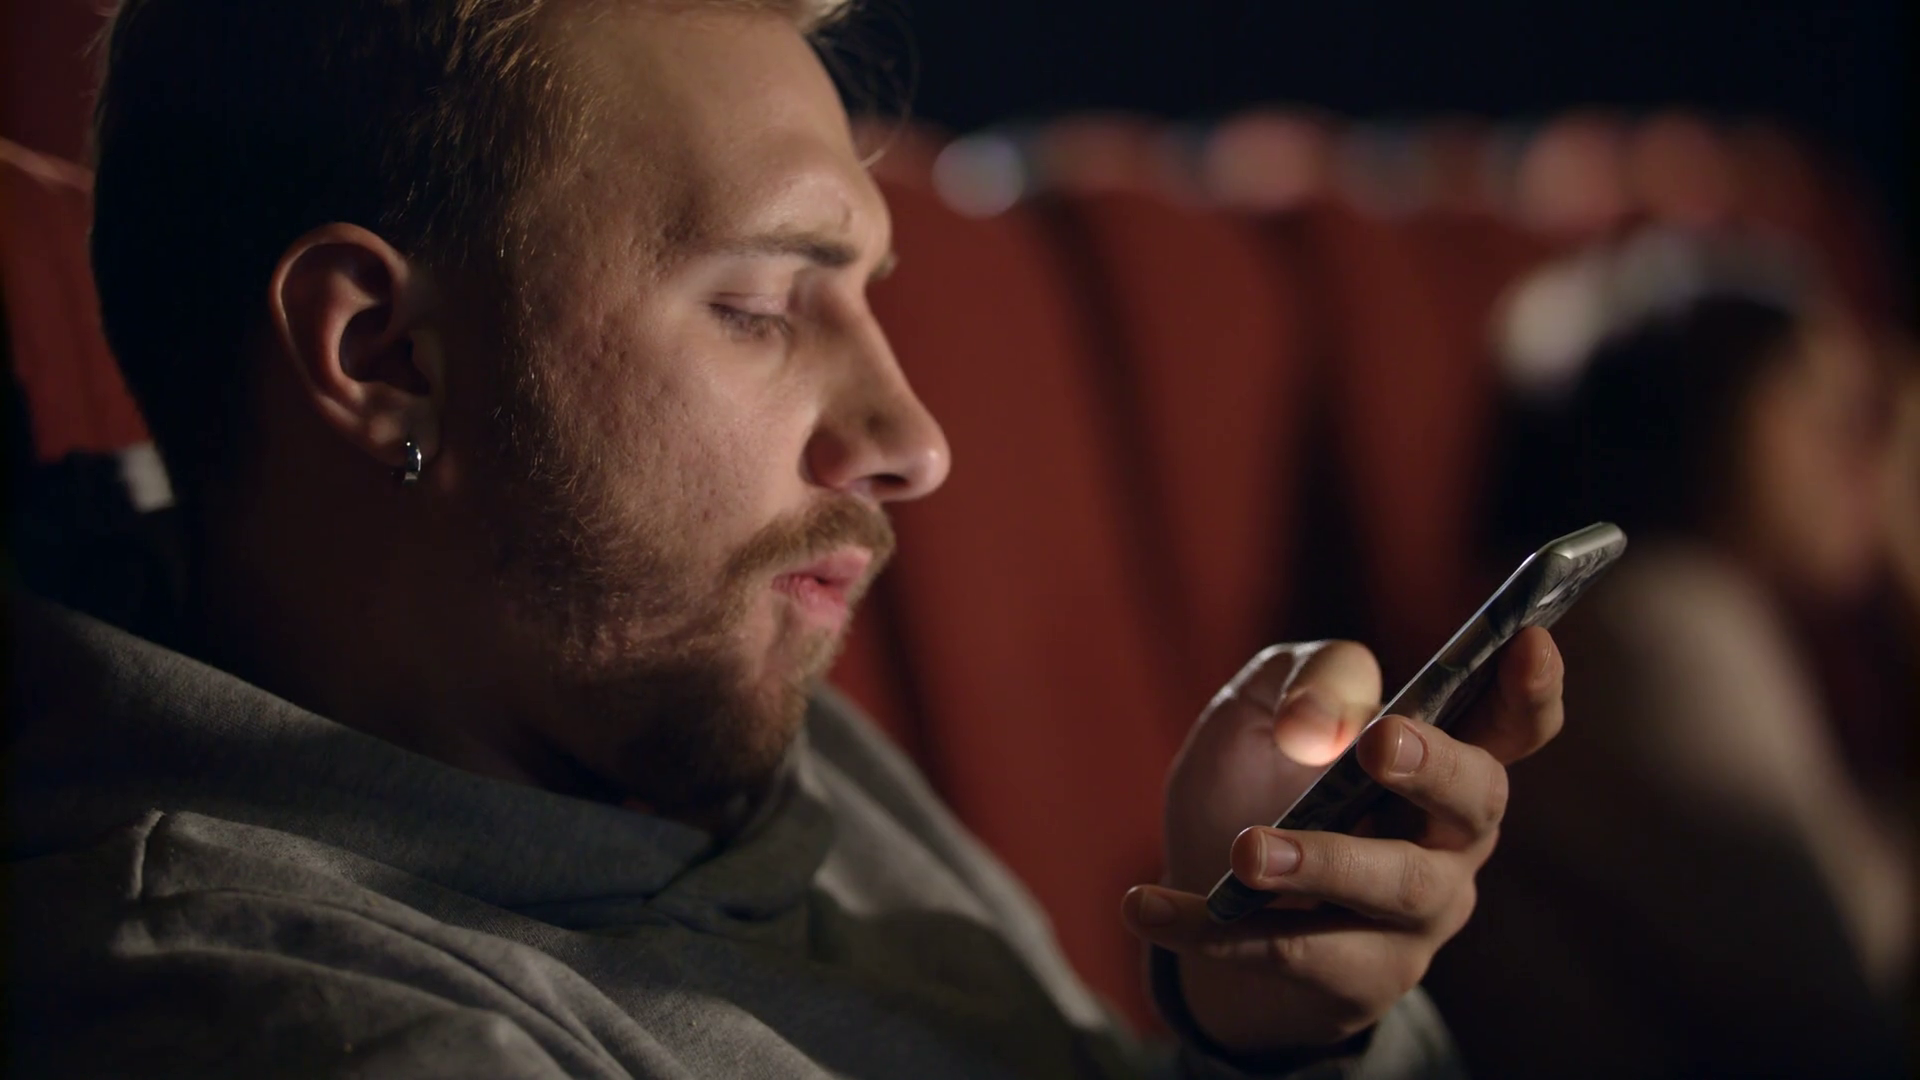 Man sitting alone checking his phone before his movie begins